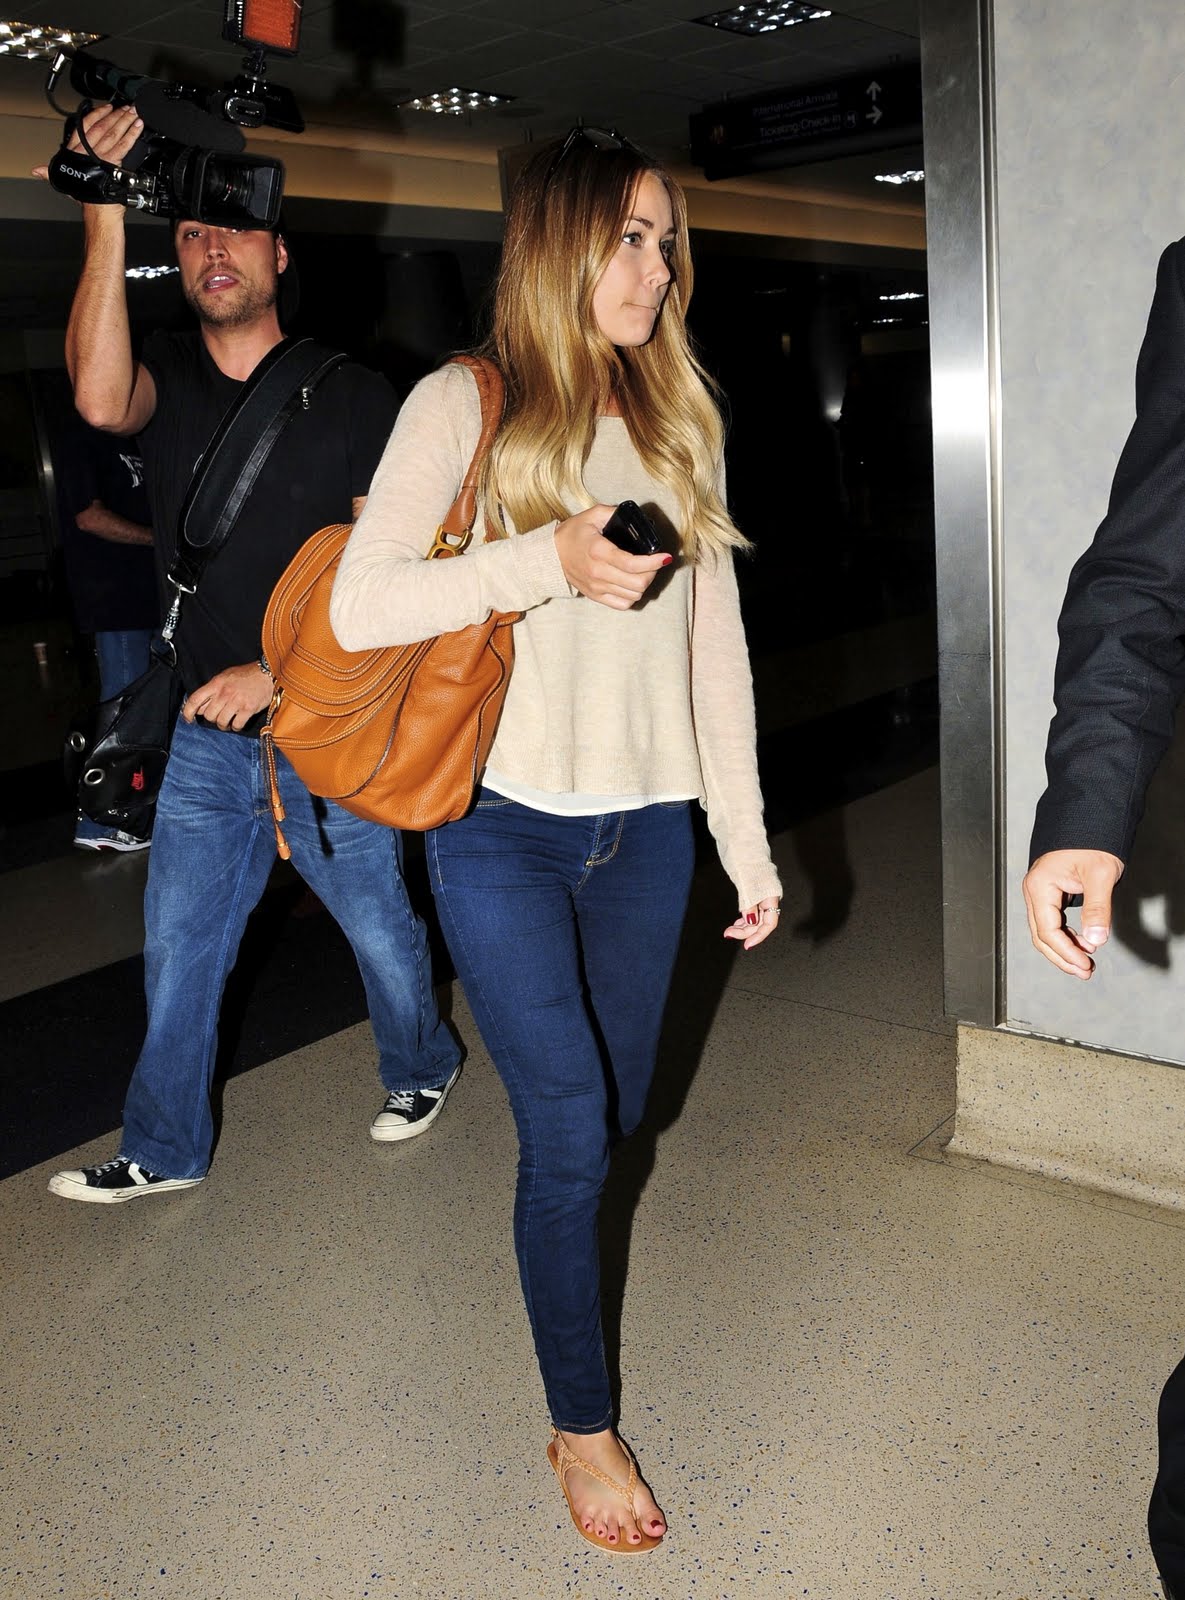 Lauren Conrad Arriving at LAX Airport December 18, 2011 – Star Style